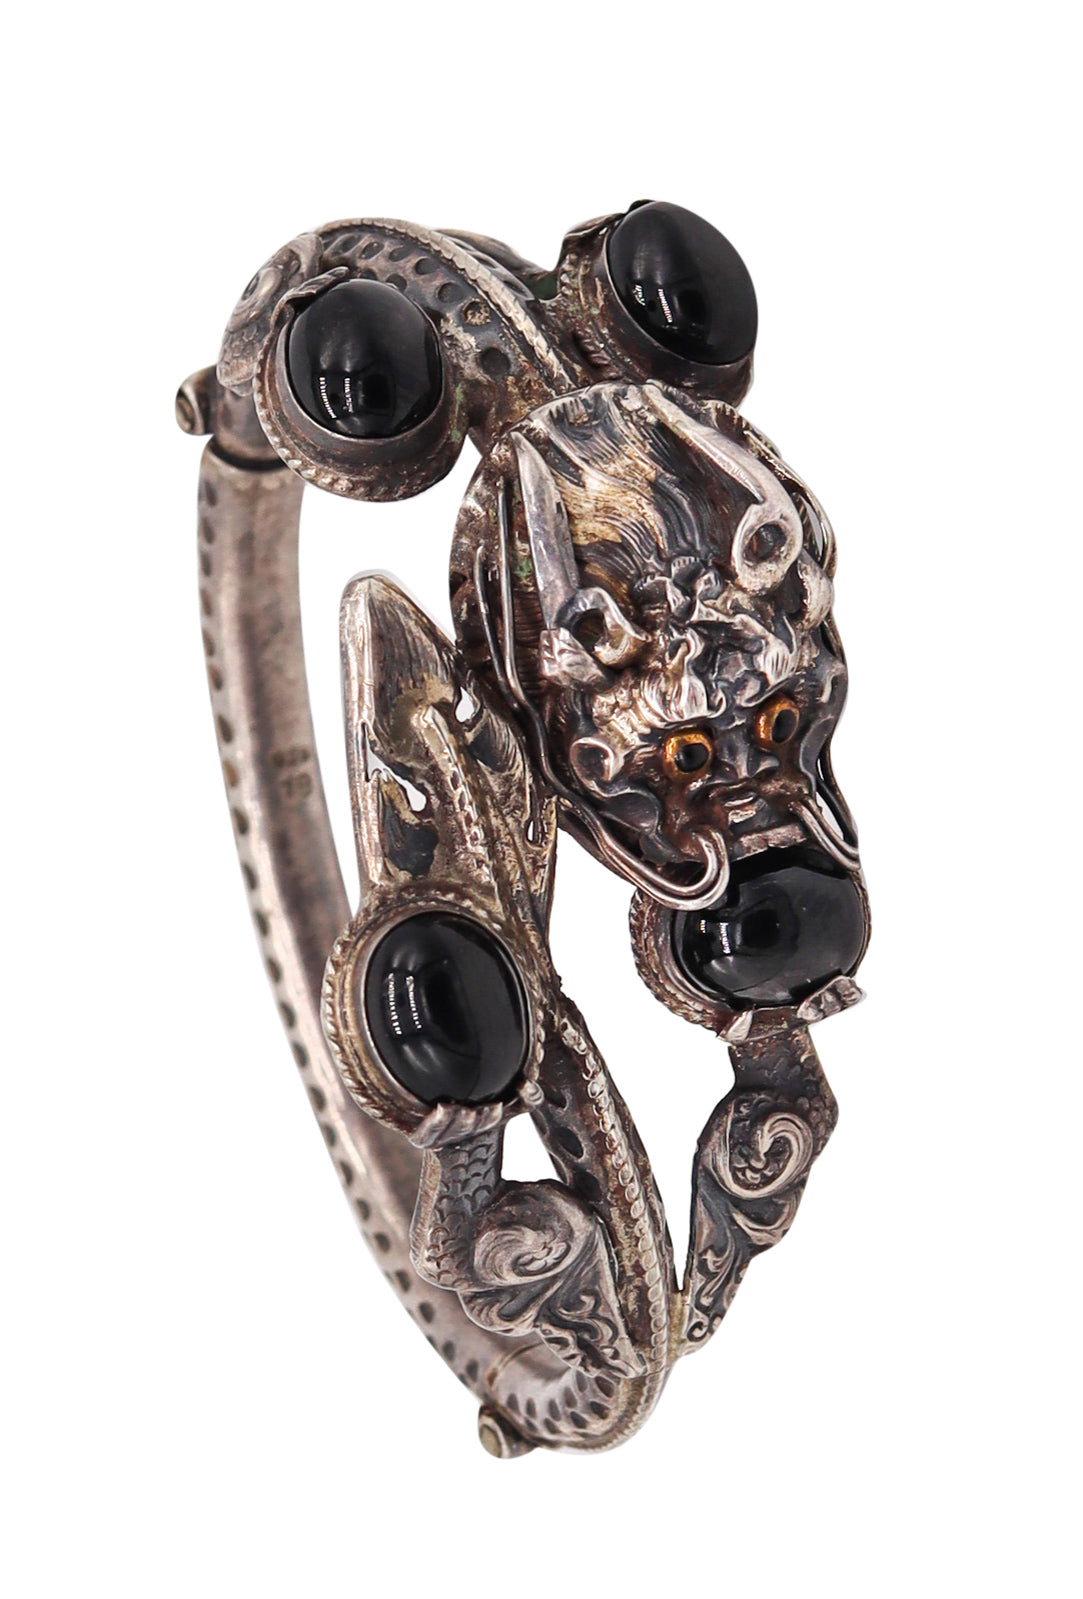 China 1900 Export Dragon Bracelet in .925 Sterling Silver With Cat's Eye Obsidian